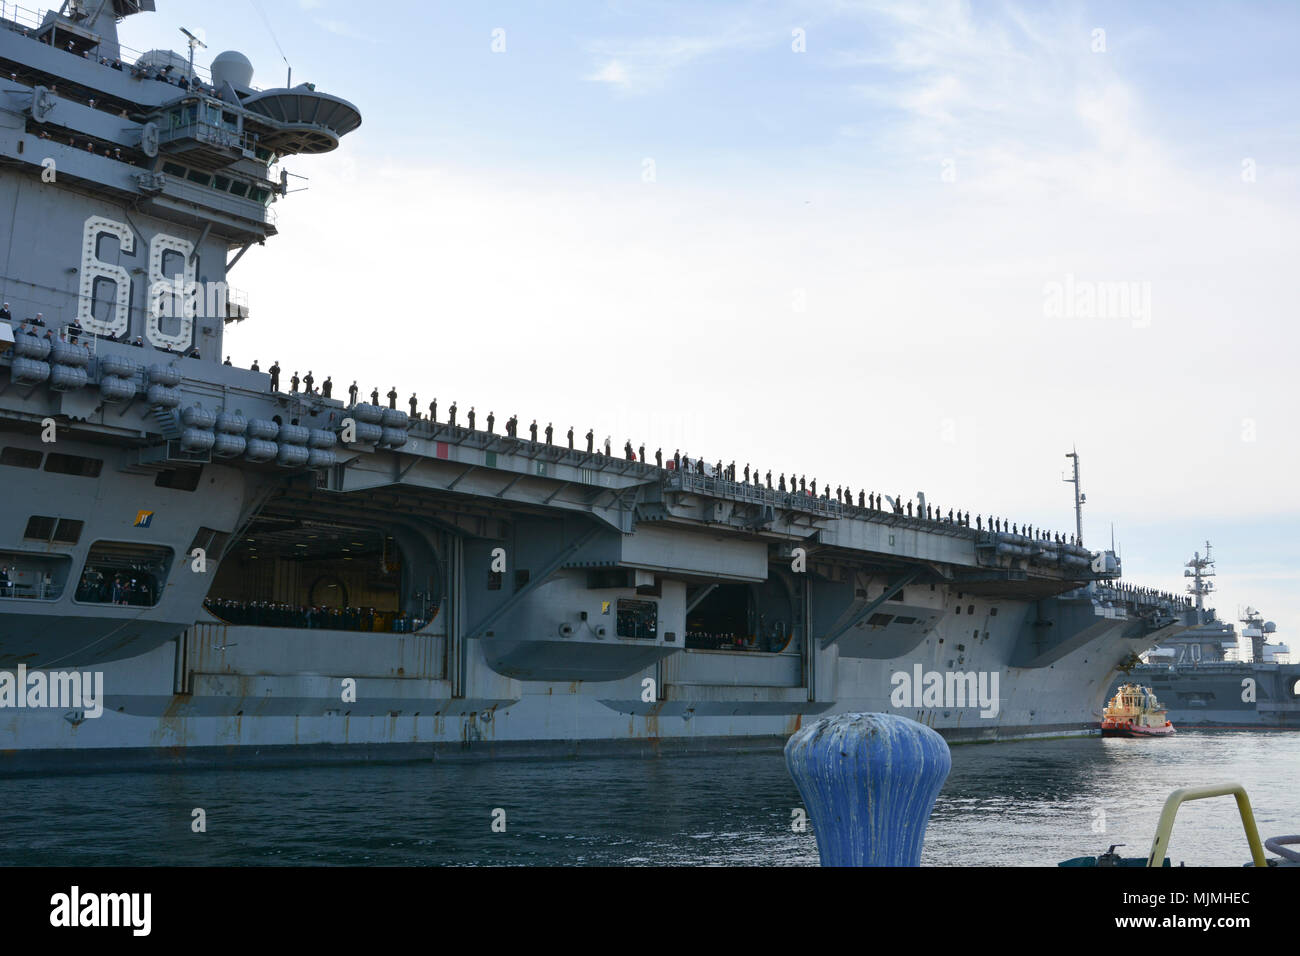 20171205-N-ZO368-004 CORONADO, Calif. (Dec. 5, 2017) Sailors and Marines assigned to aircraft carrier USS Nimitz (CVN 68) man the rails in preparation for mooring at Naval Base Coronado. The Nimitz Carrier Strike Group is on a regularly scheduled deployment to the Western Pacific. The U.S. Navy has patrolled the Indo-Asia-Pacific region routinely for more than 70 years promoting peace and security. U.S. Navy photo by Mass Communication Specialist 1st Class Travis Alston (Released) Stock Photo